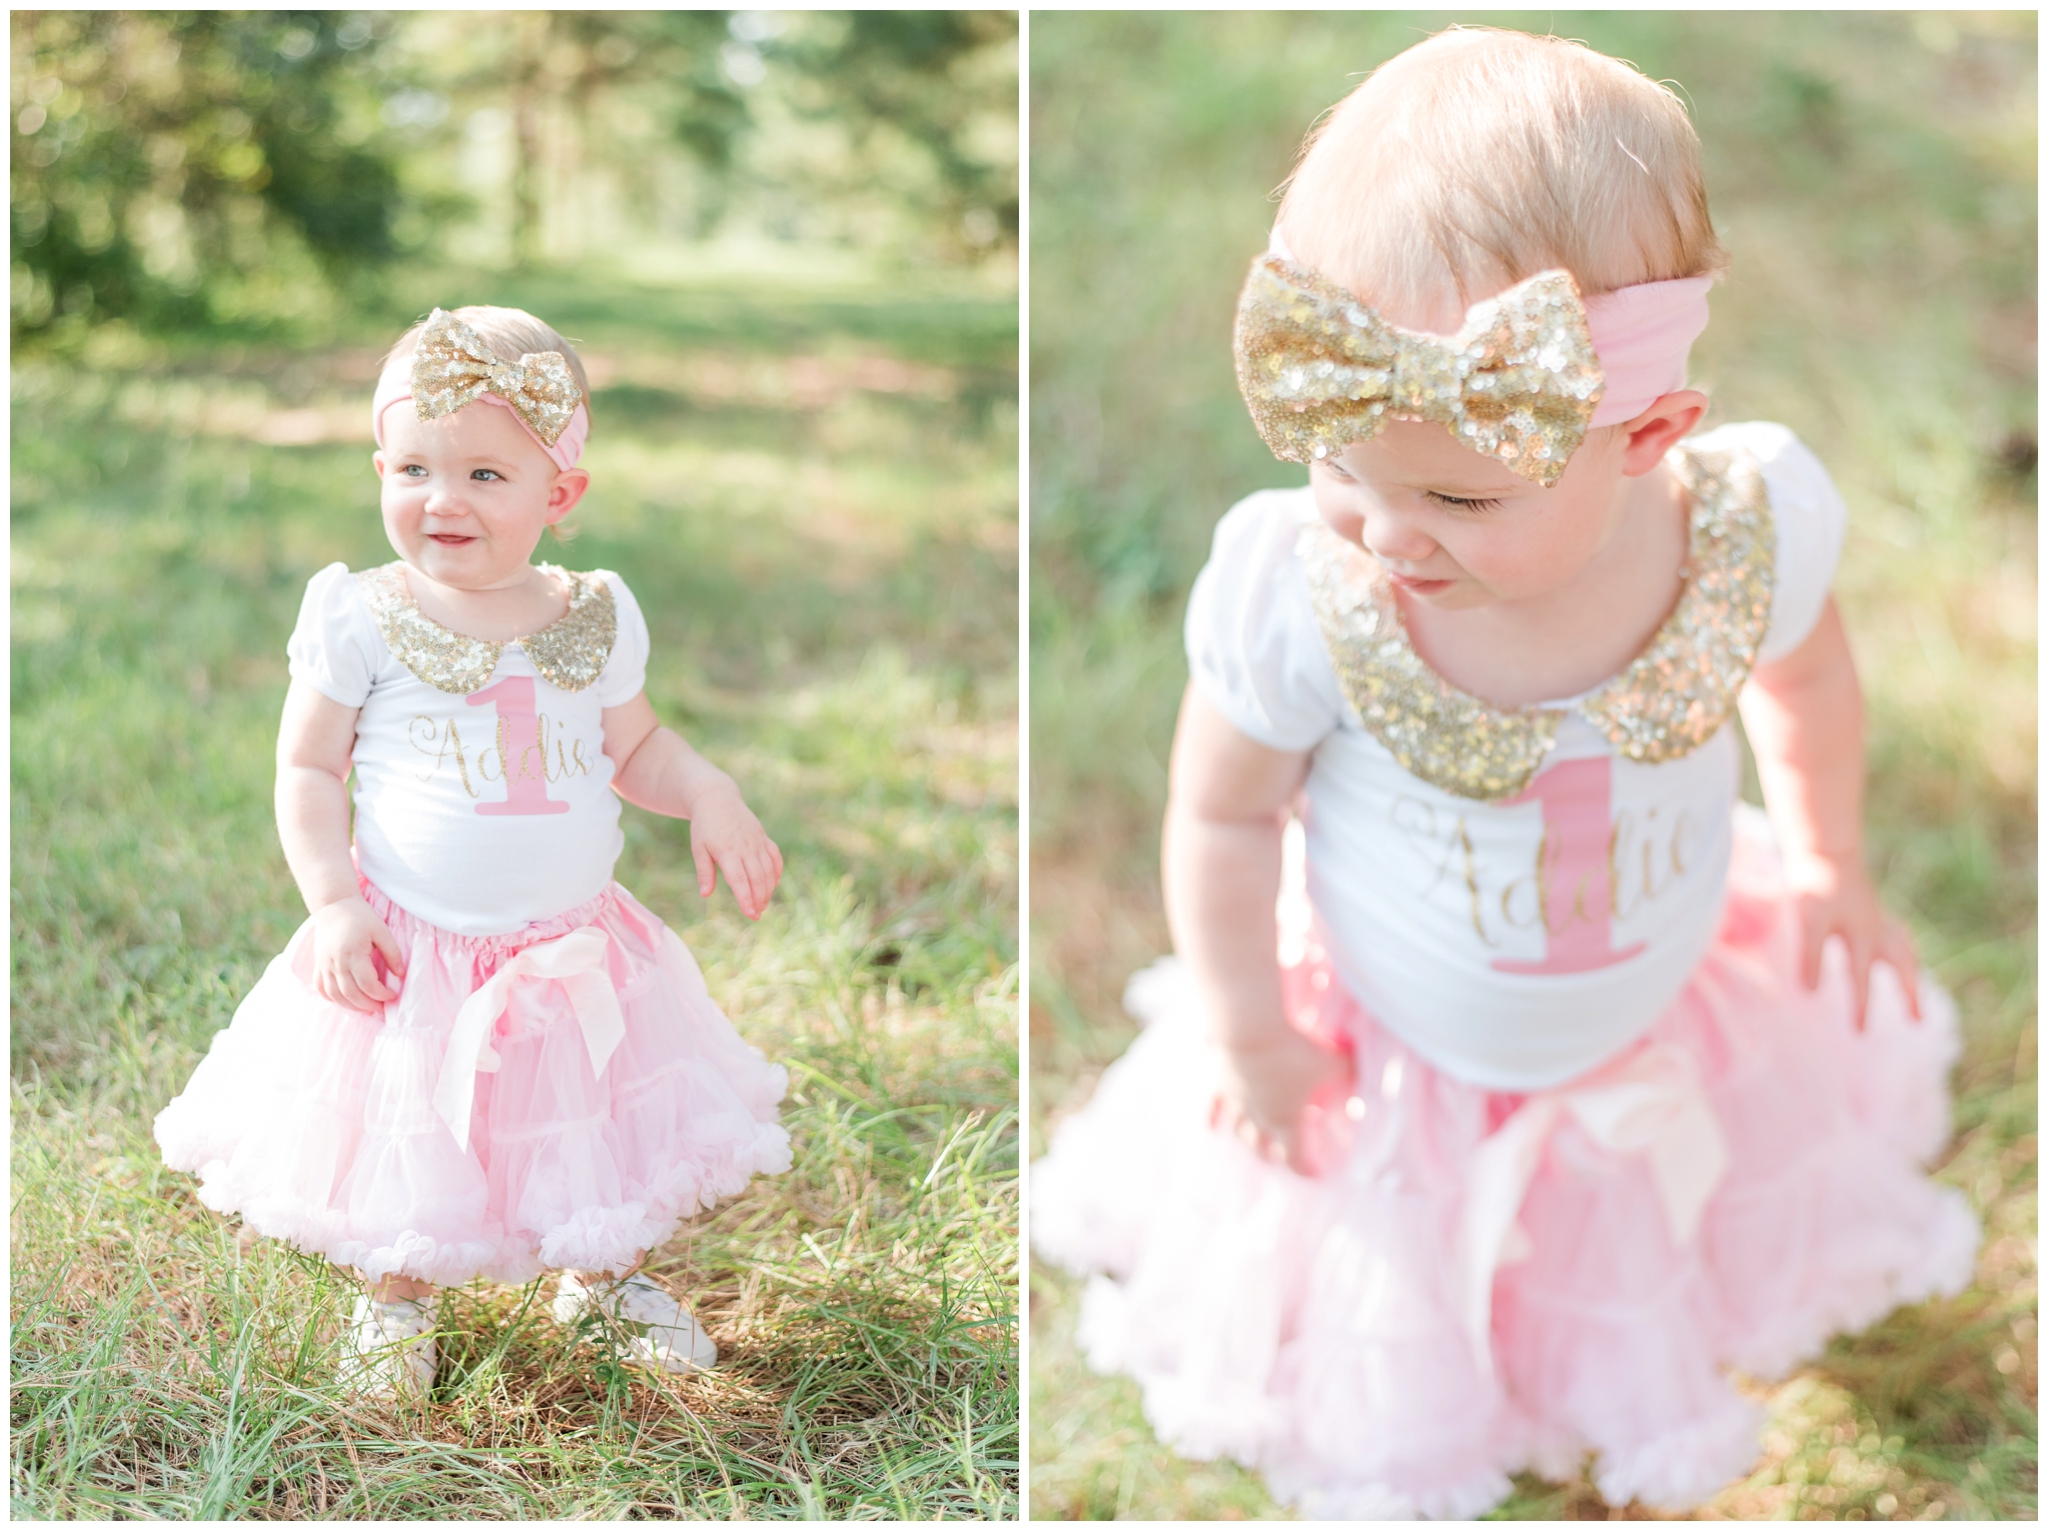 Kingwood child photographer 1 year milestone session with little girl in pink & gold sequin outfit